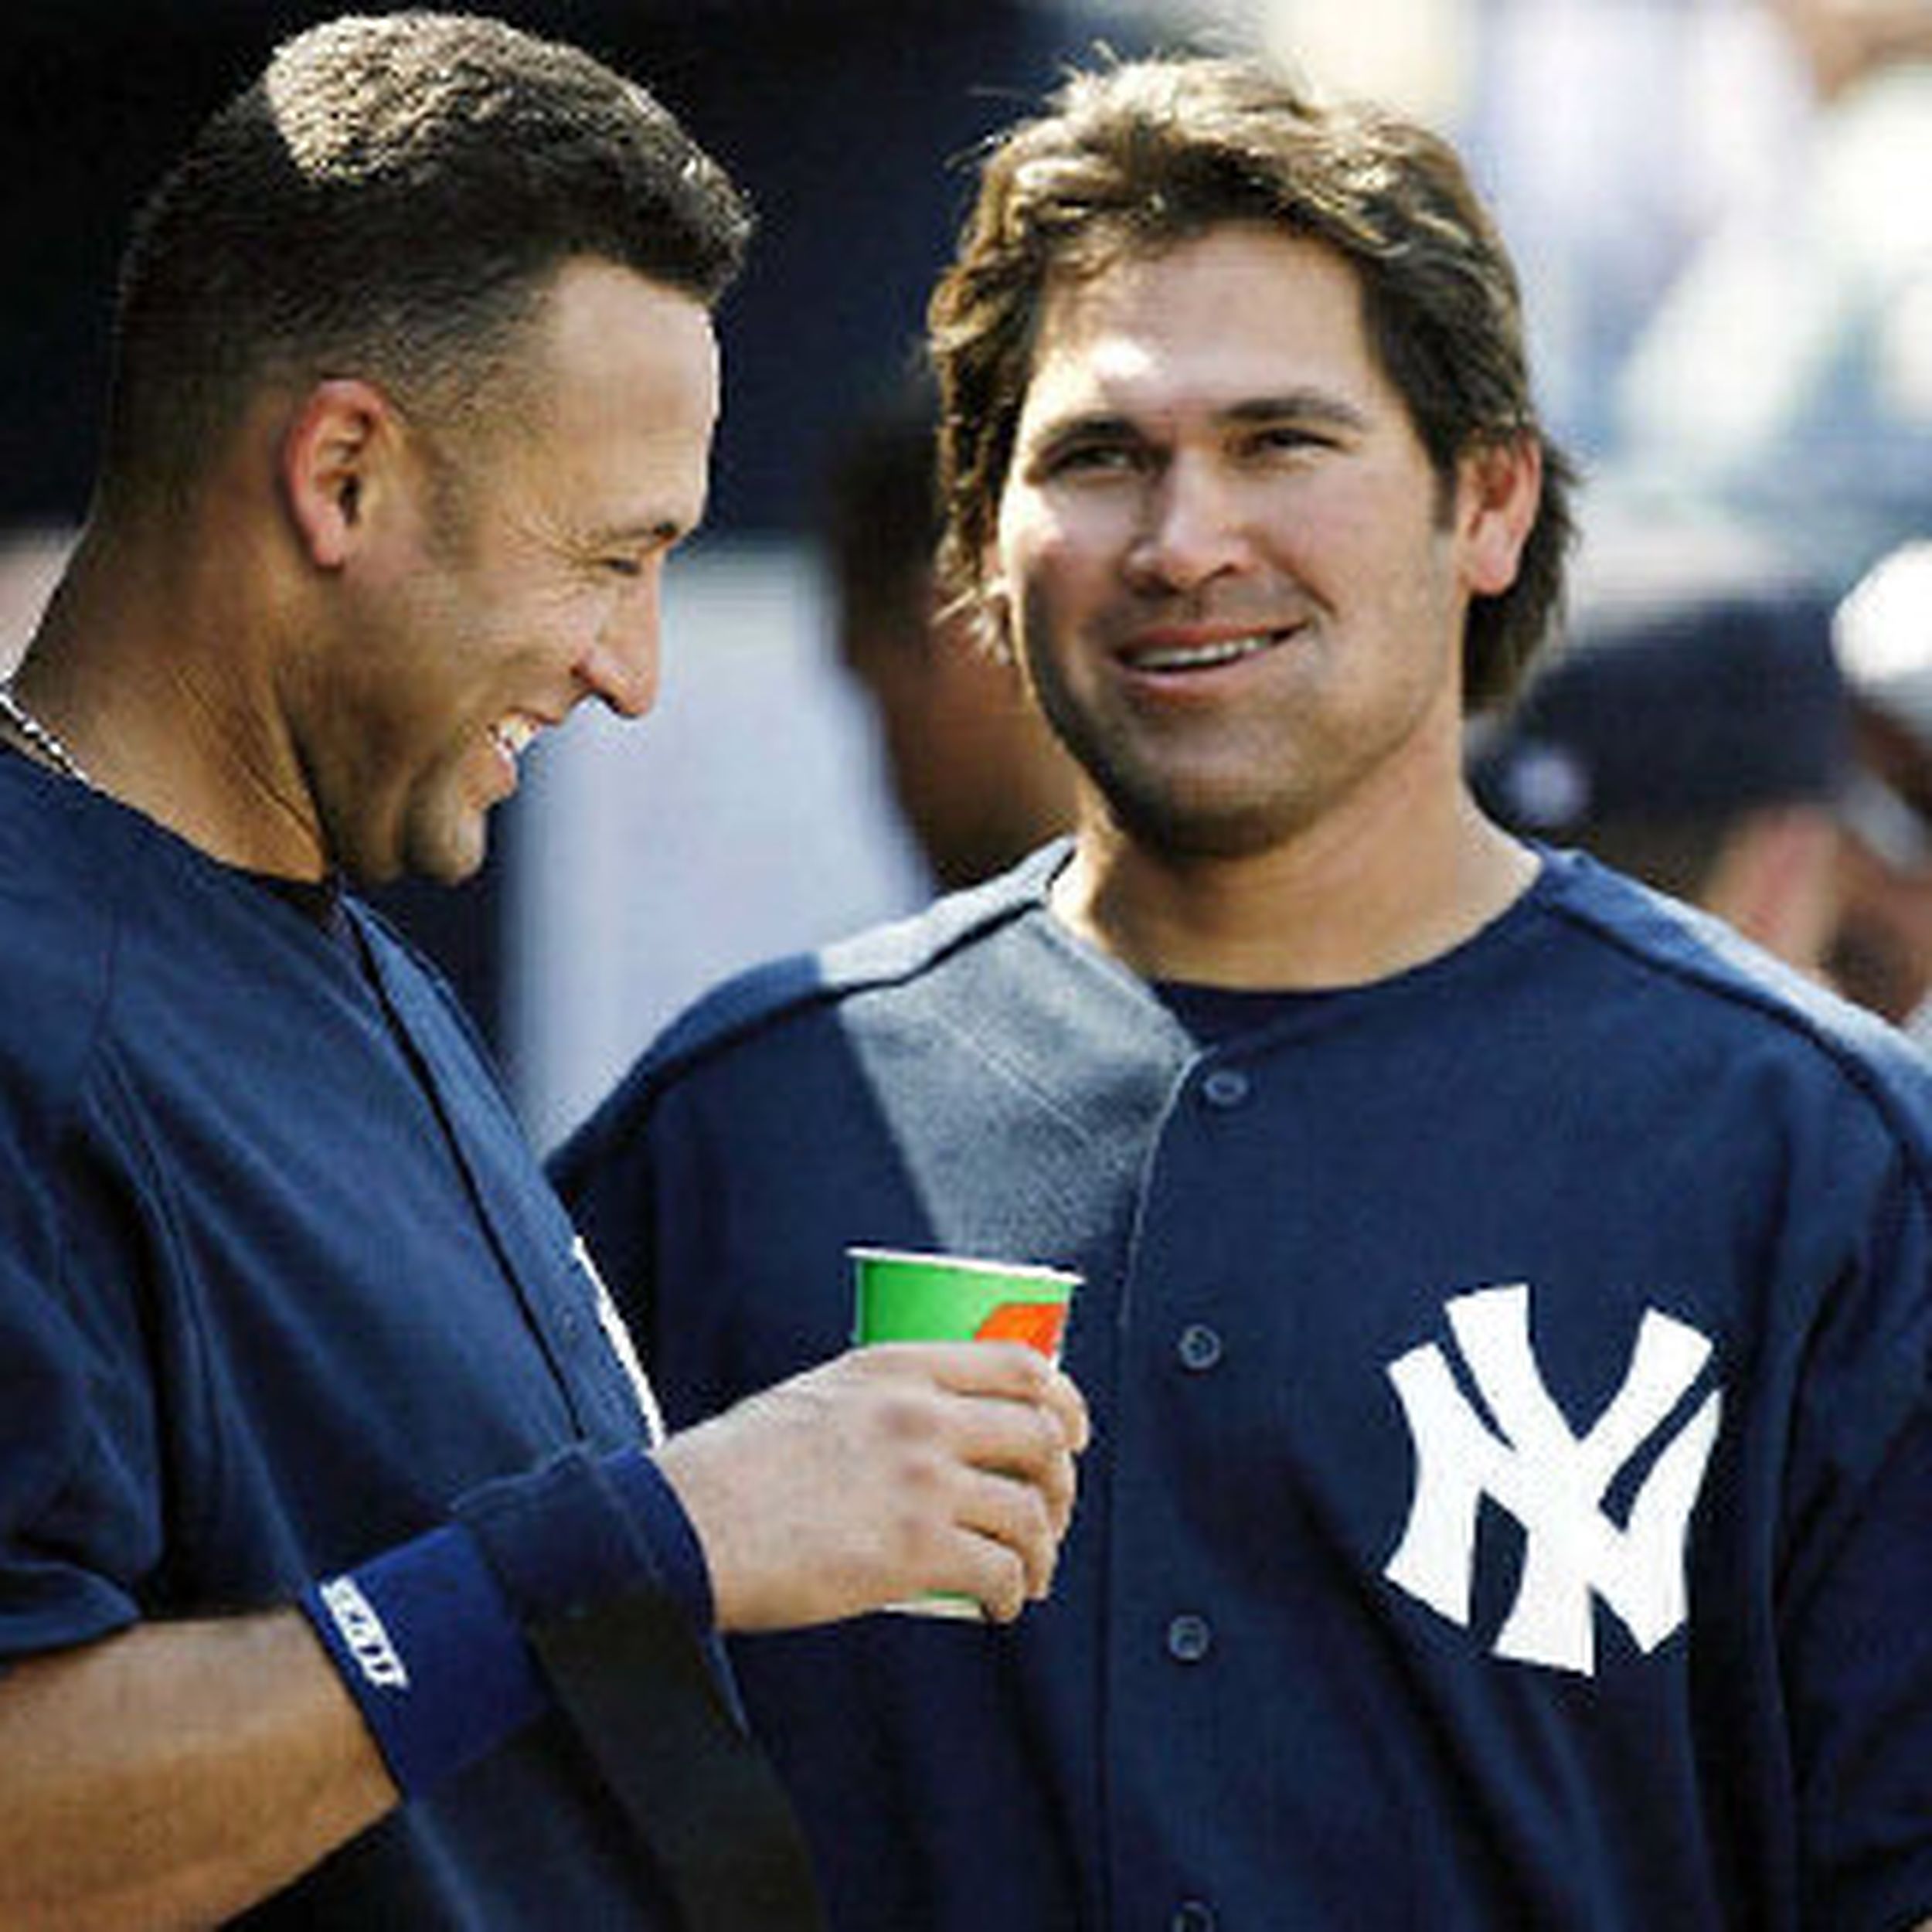 Johnny Damon on X: Fun with the #family at our friends farm to